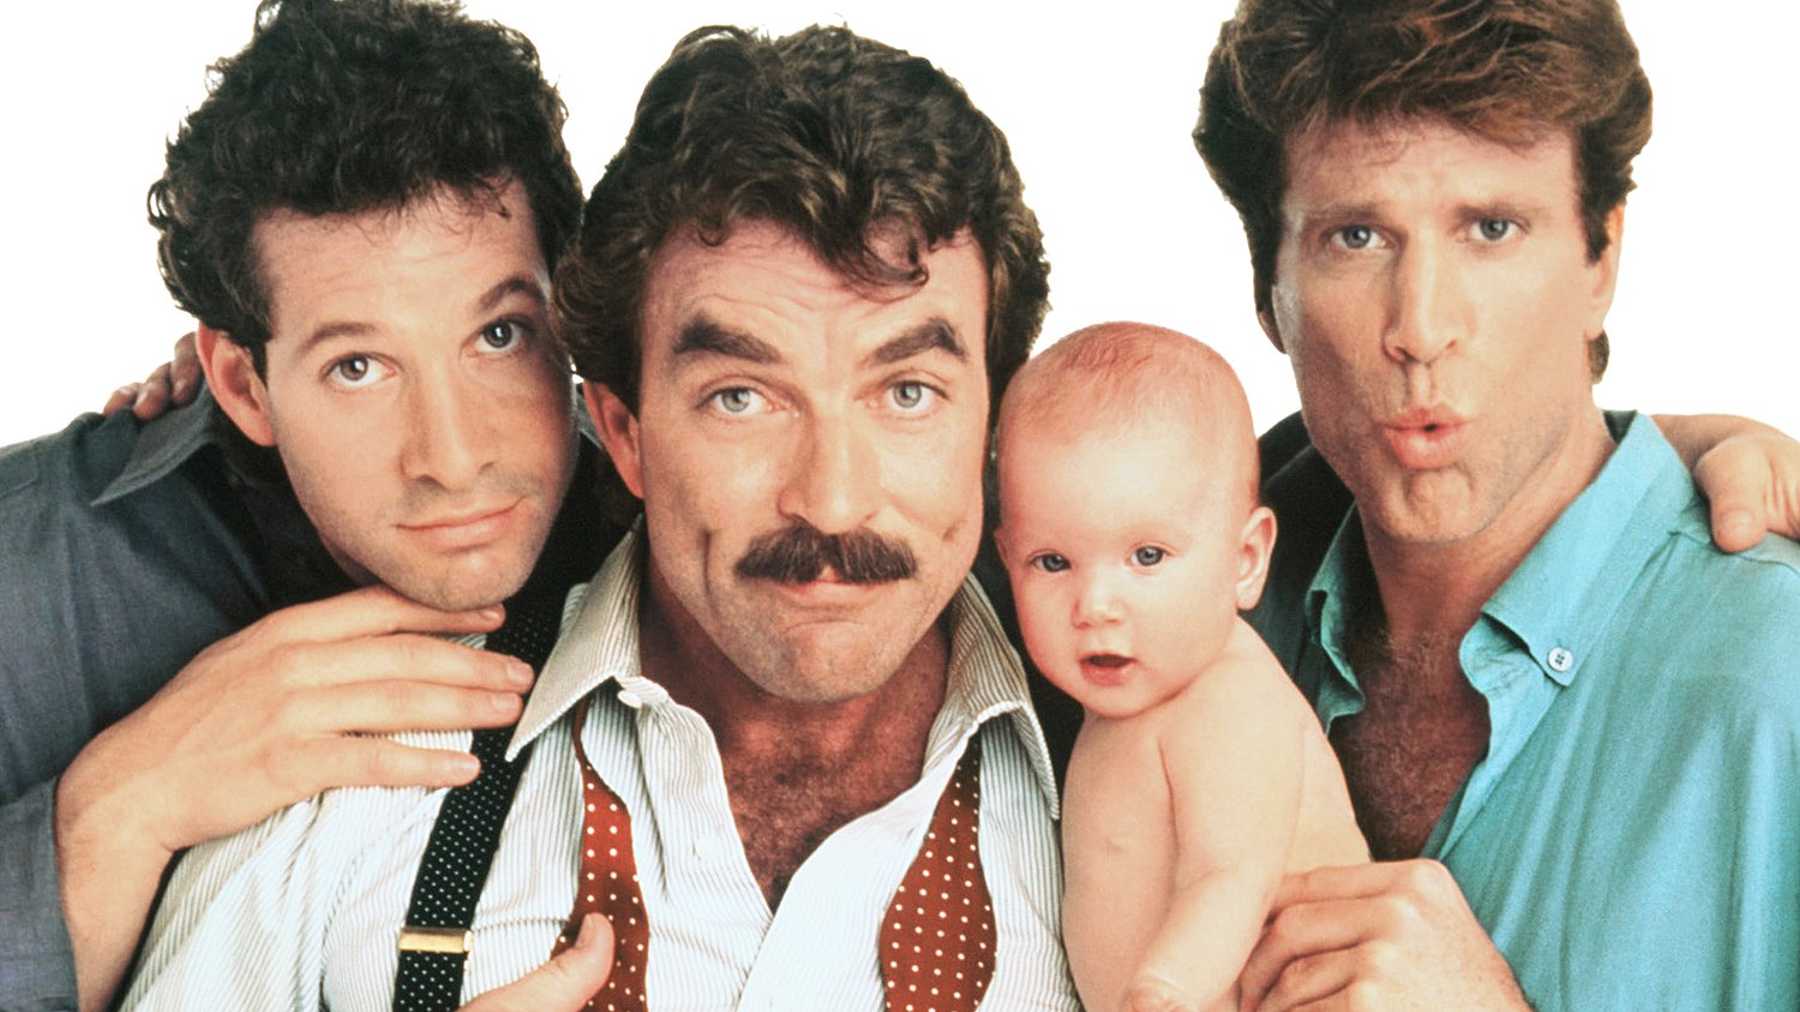 How Did you learn fatherhood? Remember those days with Three Men and a Baby